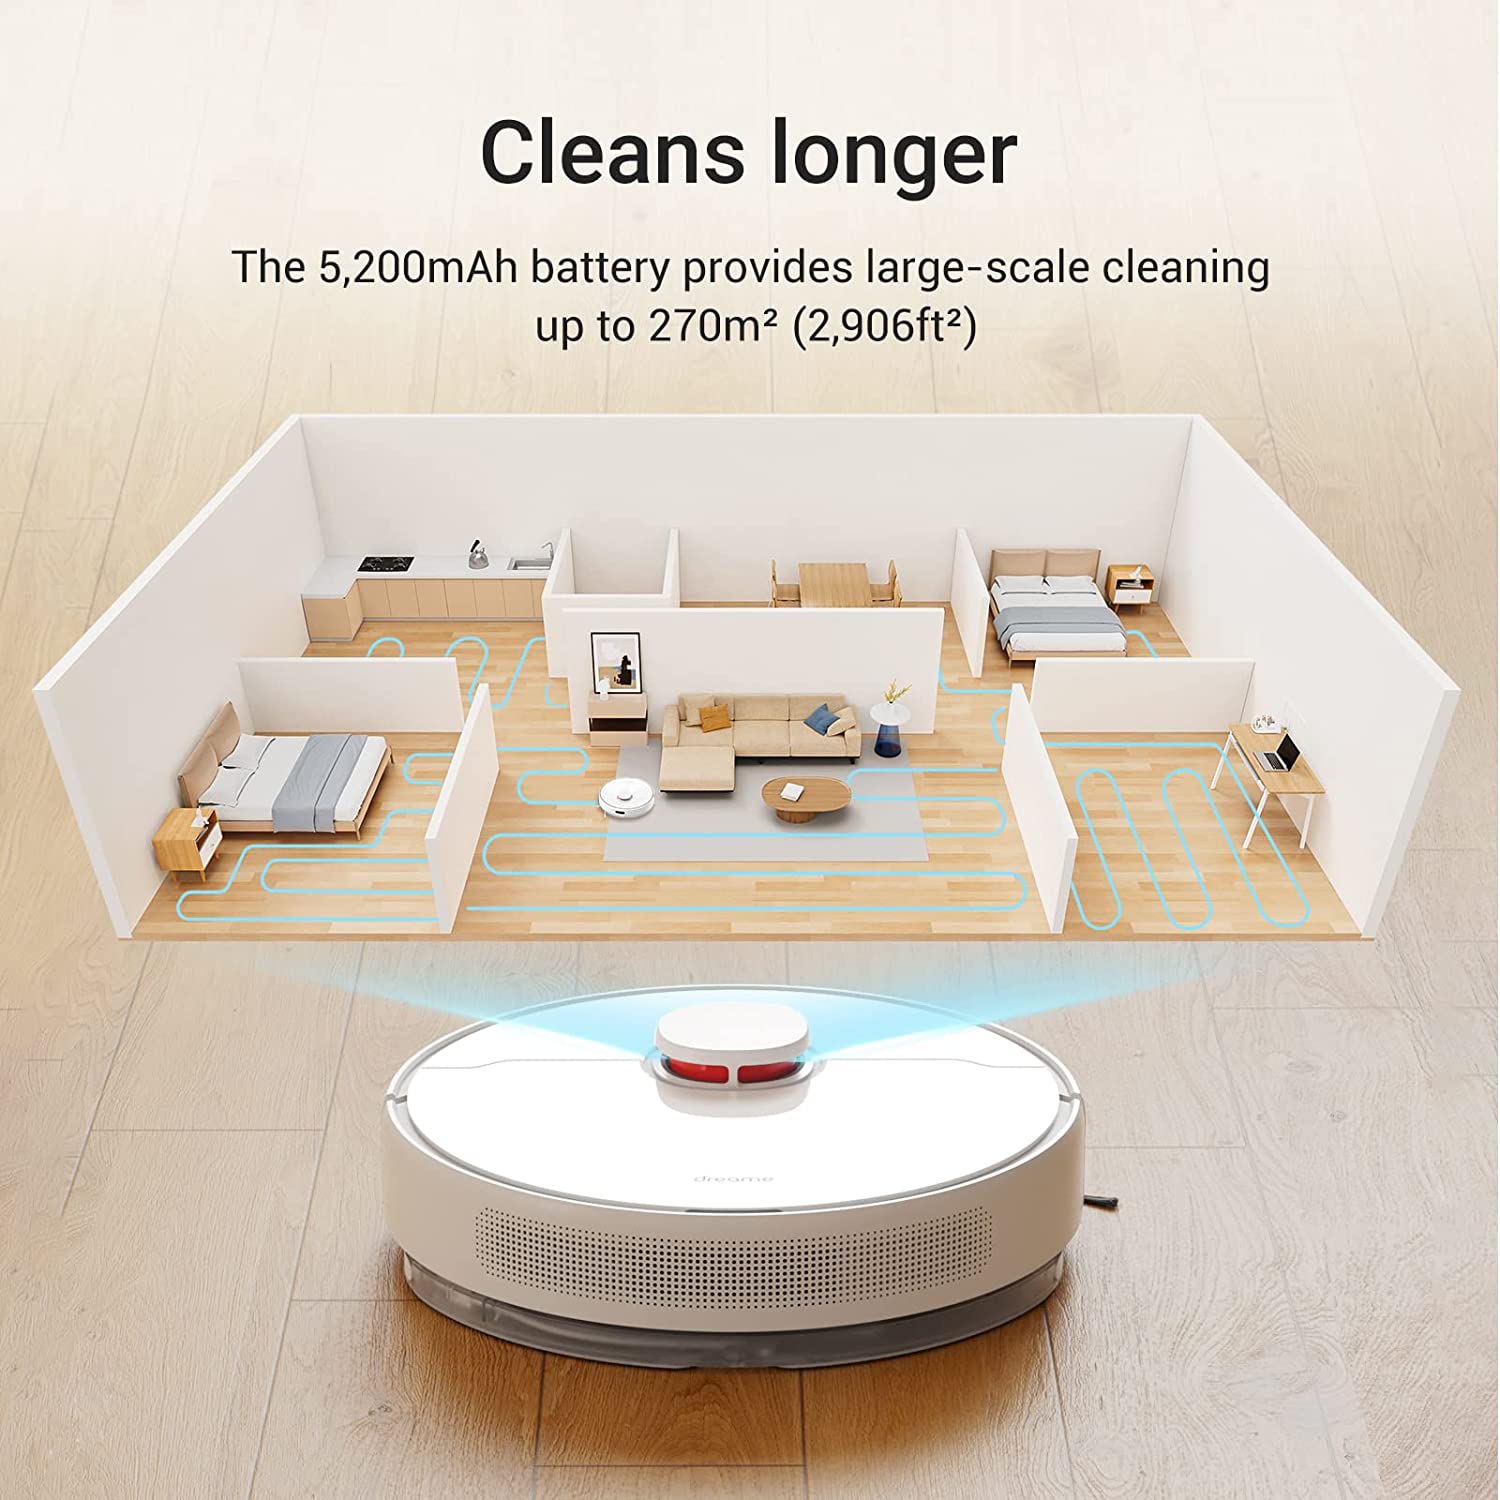  Dreametech D10 Plus Robot Vacuum and Mop with Self-Emptying  Base, Main Roller Brush Compatible with D10 Plus/L10 Pro/D9 Pro/D9 Max  Robot Vacuum